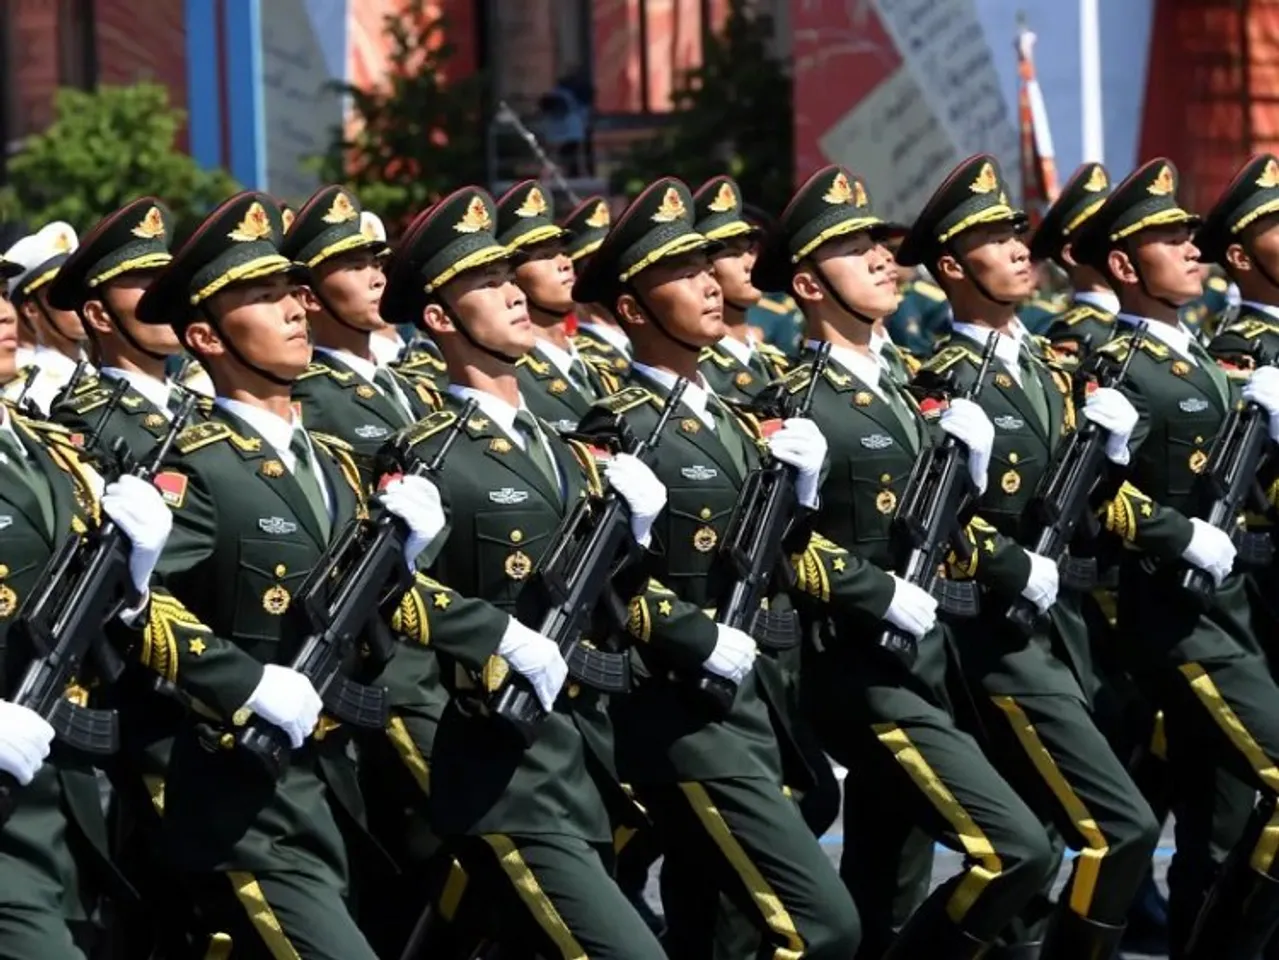 Parade unit of Chinese Armed forces